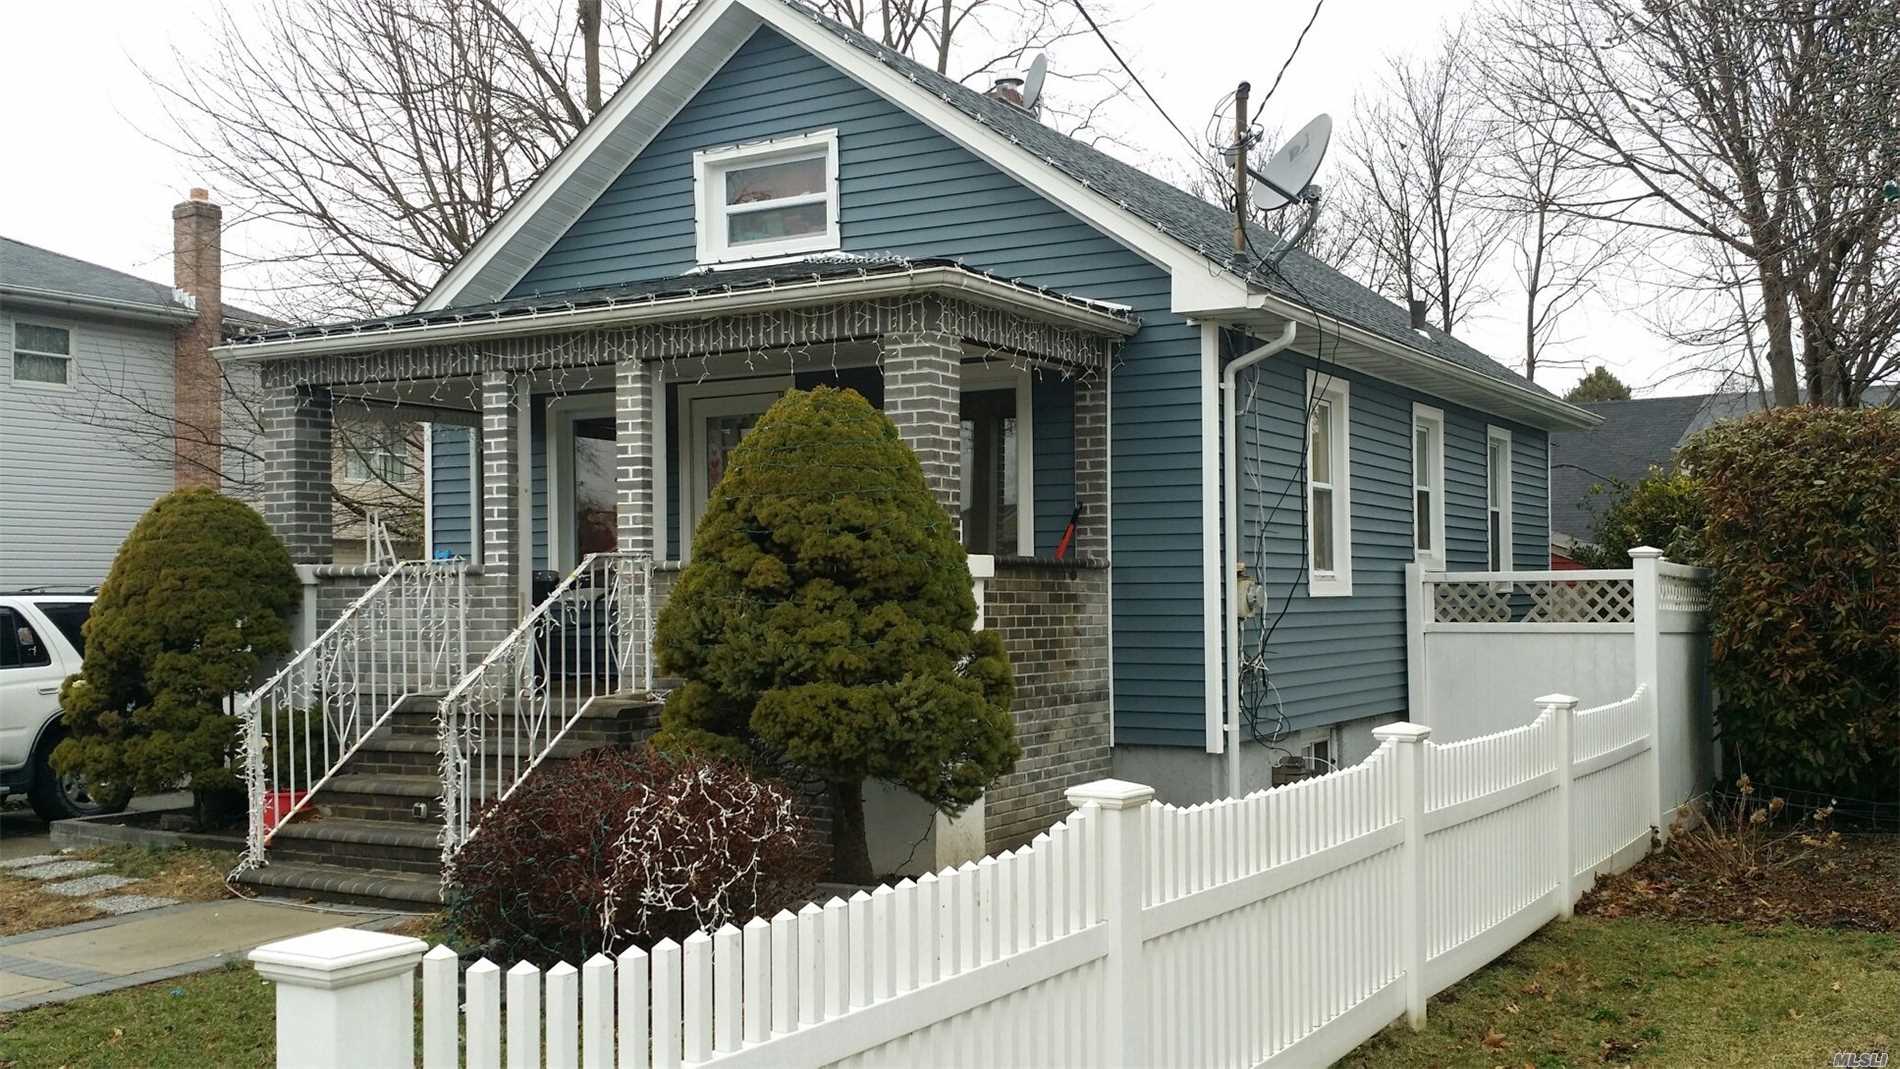 Uniondale: The Home You&rsquo;ve Been Waiting For! The Wonderful Single Family Detached Home Features 2 Bedrooms, Full Bath, Living/Dining Room Combo, Eat-In-Kitchen, Open Porch, Full Finished Basement & So Much More!